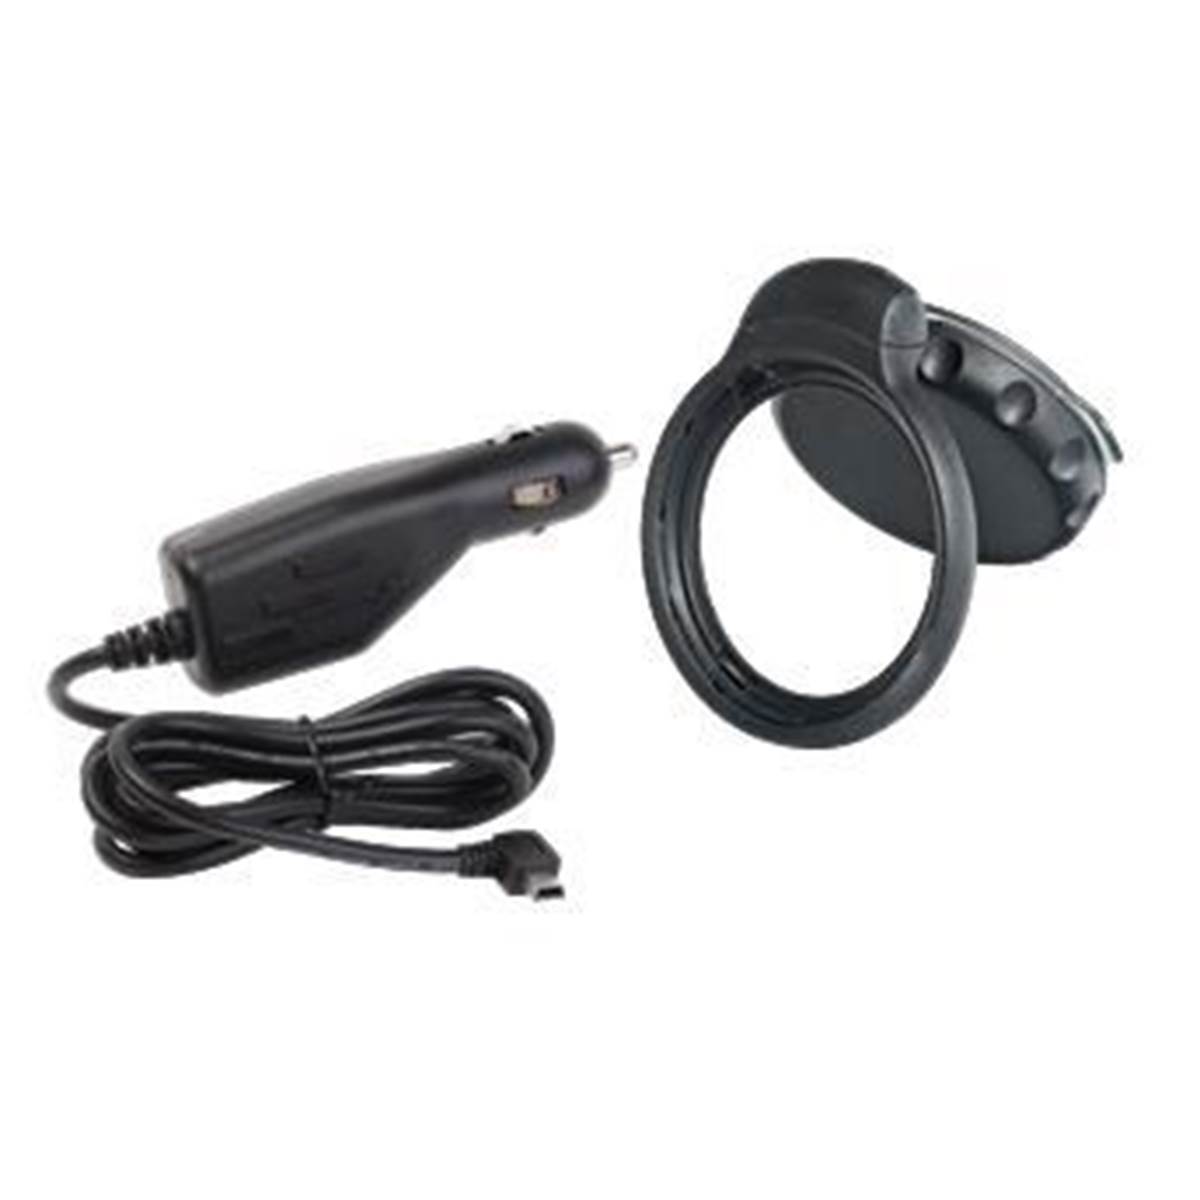 Support Et Chargeur Allume-cigare Pour Gps Tomtom New One, Xl Iq² Et Xxl